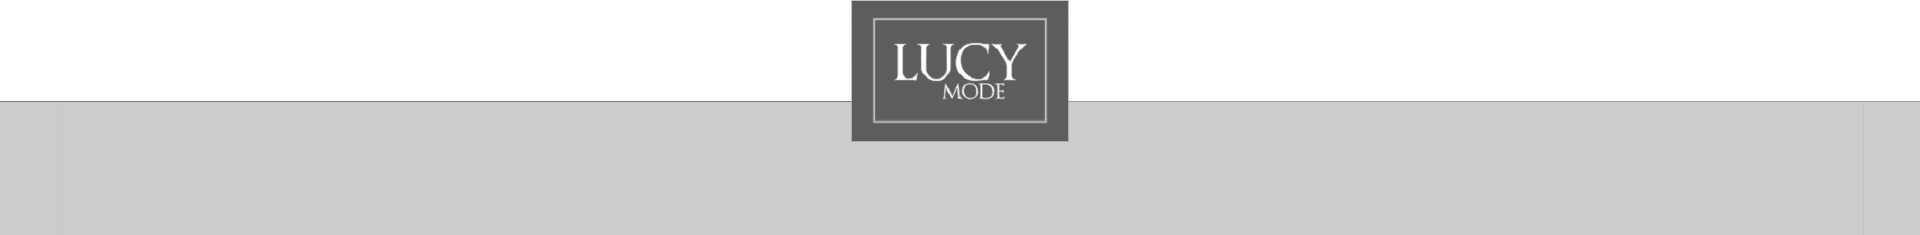 Lucy's Mode